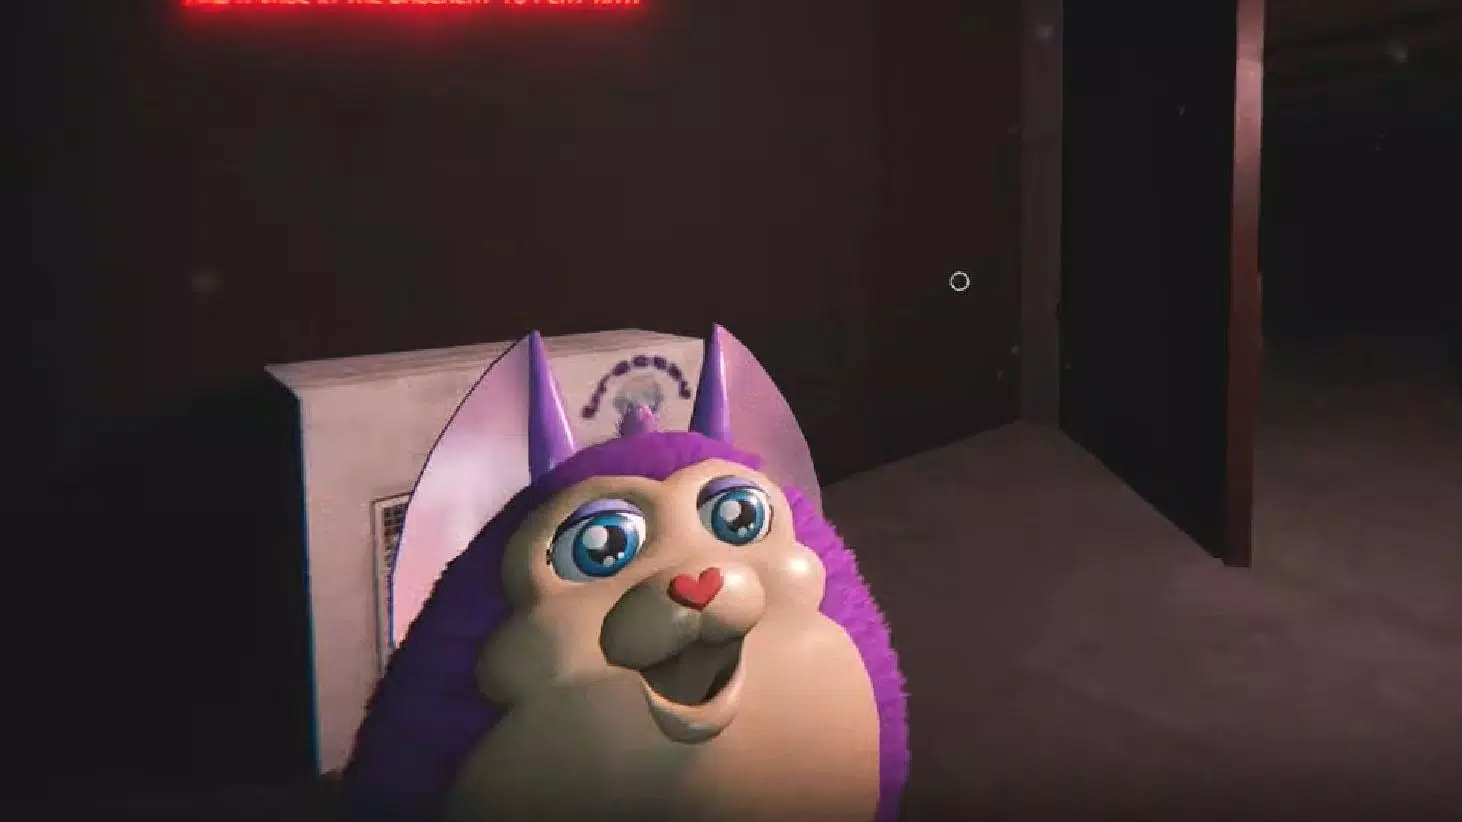 Tattletail APK for Android Download